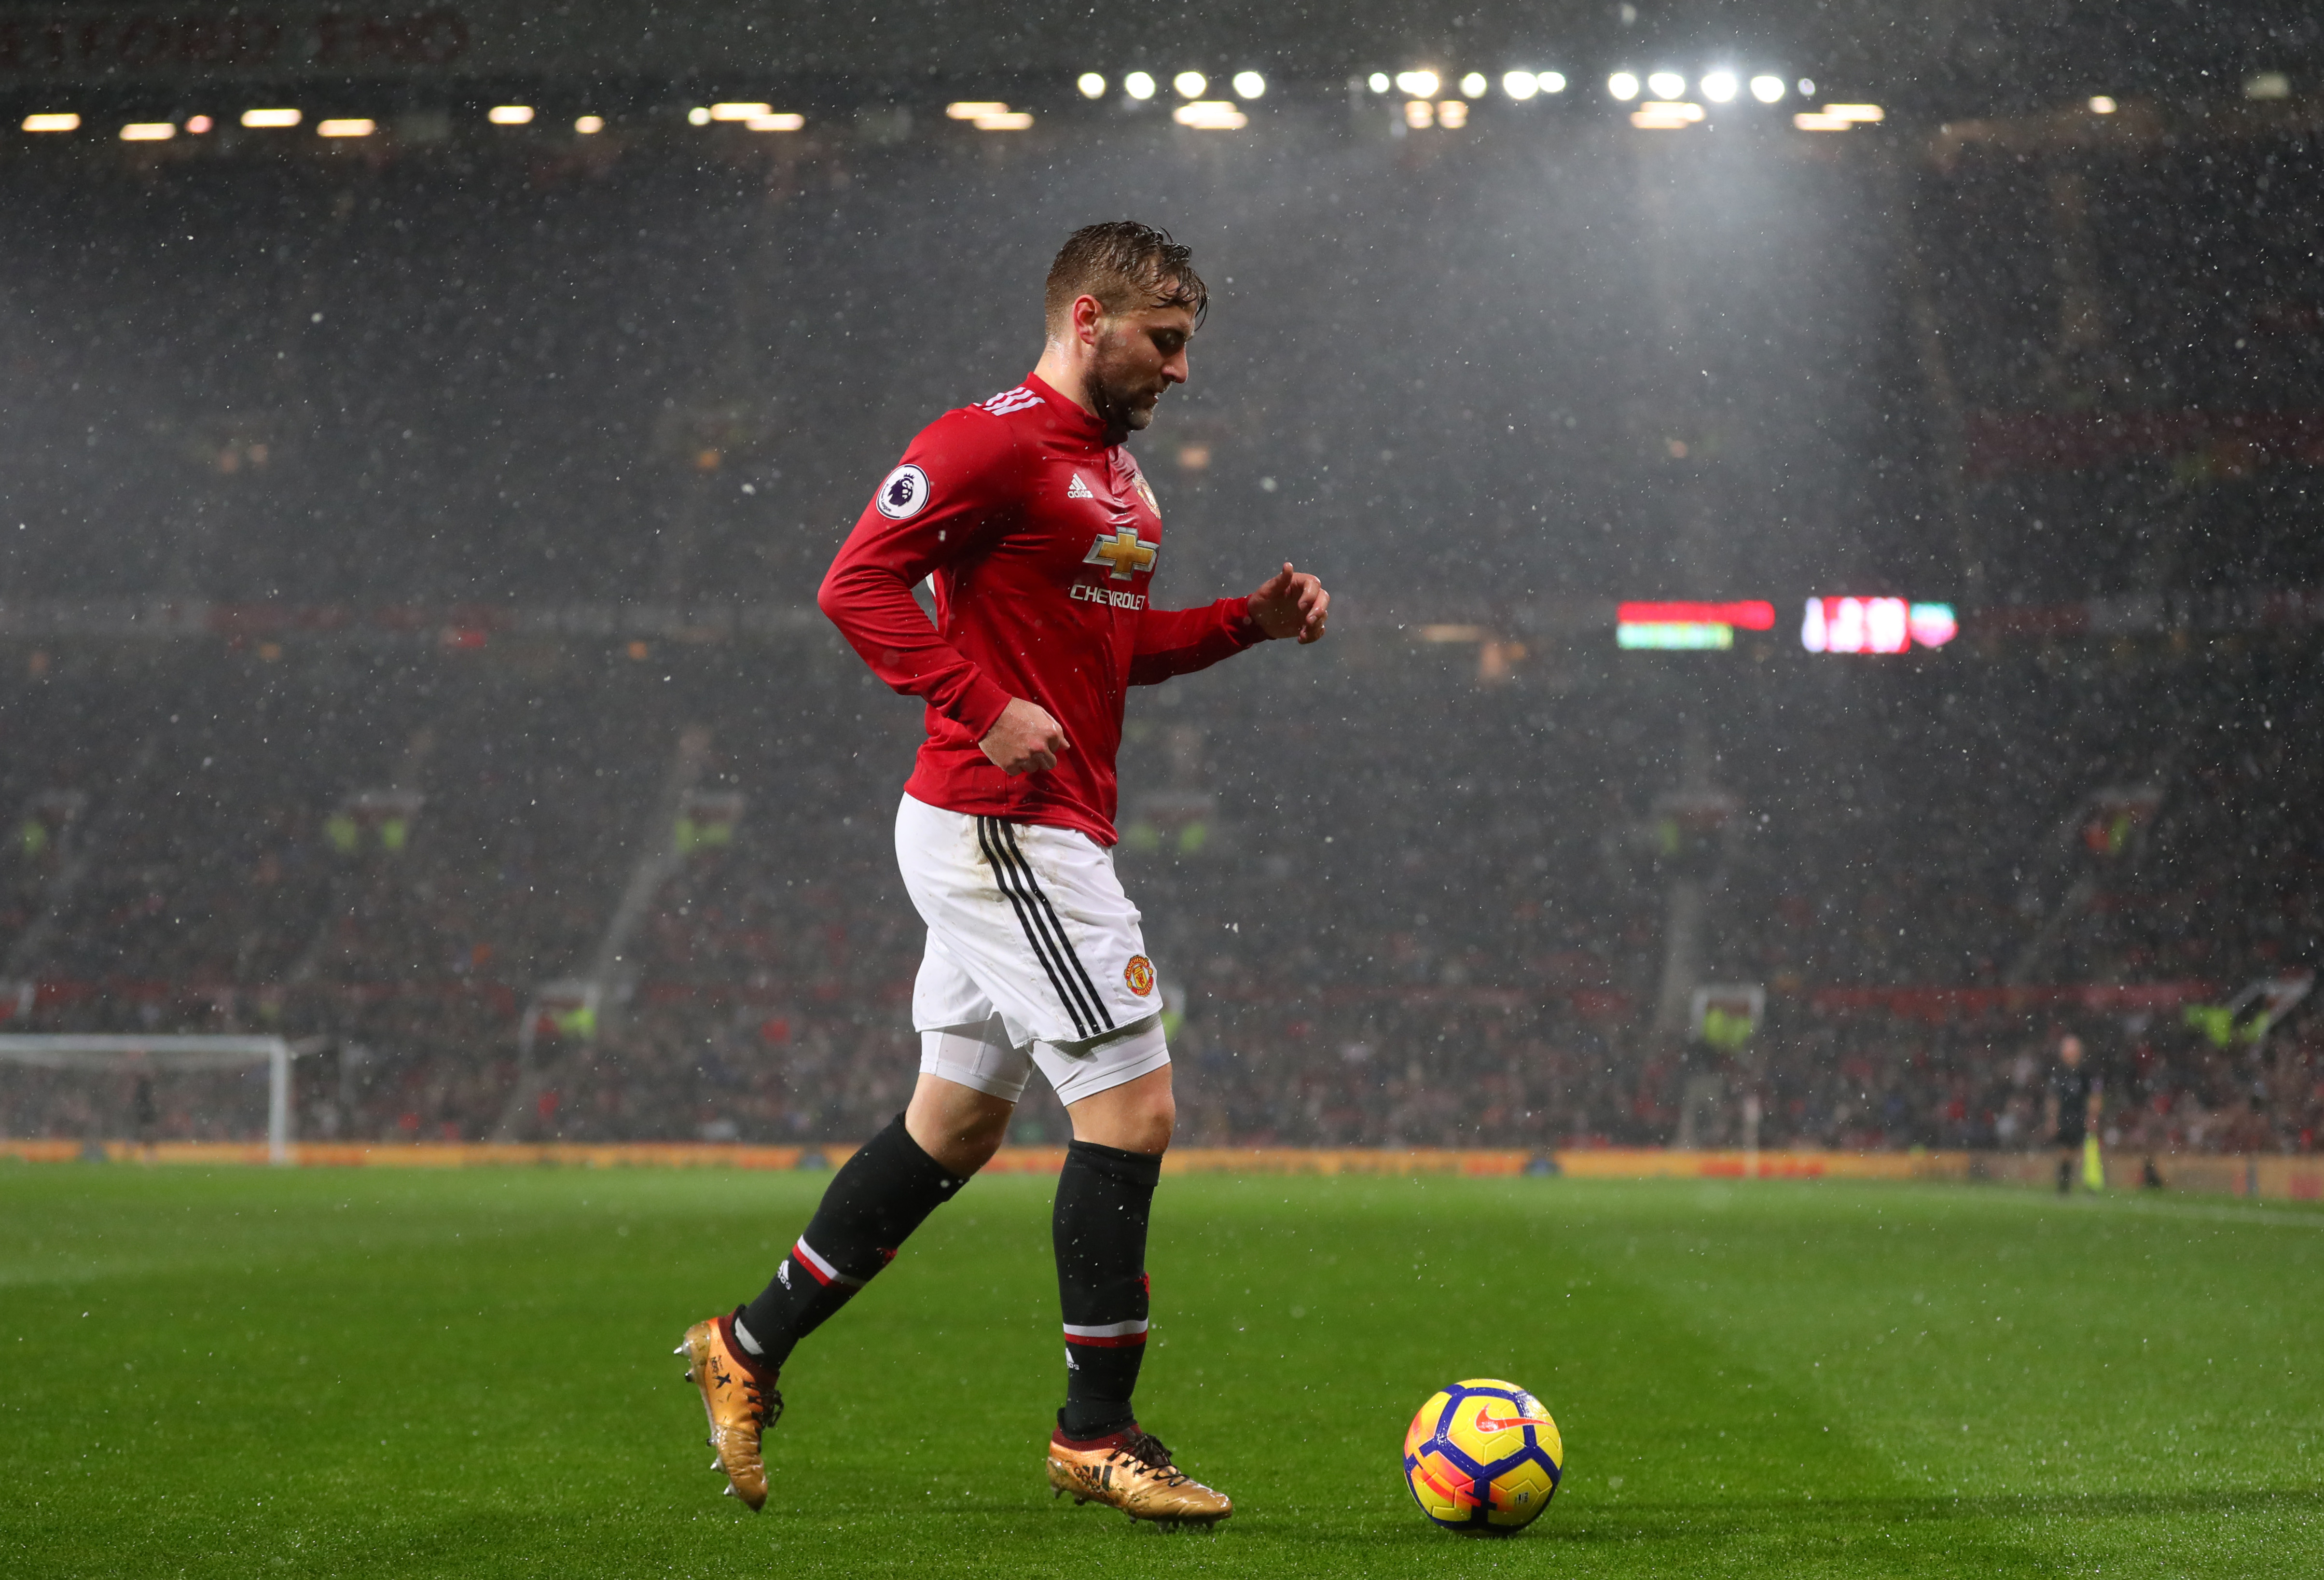 MANCHESTER, ENGLAND - DECEMBER 13: Luke Shaw of Manchester United during the Premier League match between Manchester United and AFC Bournemouth at Old Trafford on December 13, 2017 in Manchester, England. (Photo by Catherine Ivill/Getty Images)